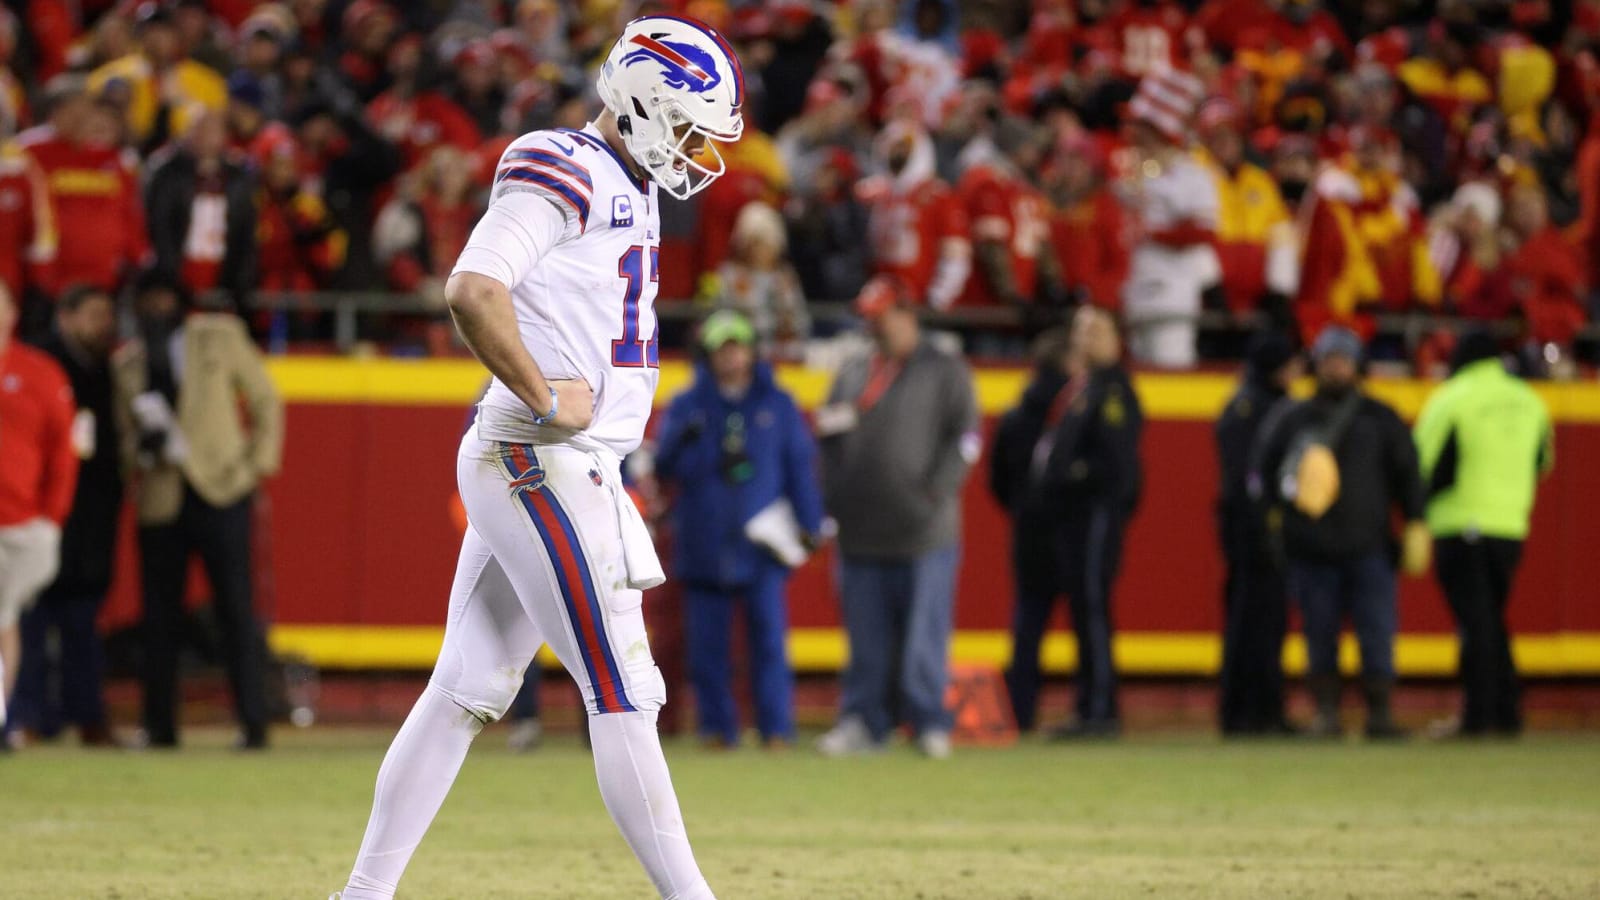 Josh Allen breaks silence on Stefon Diggs departure from Bills amidst ugly fallout talks: 'Don’t get paid to make changes on the team'